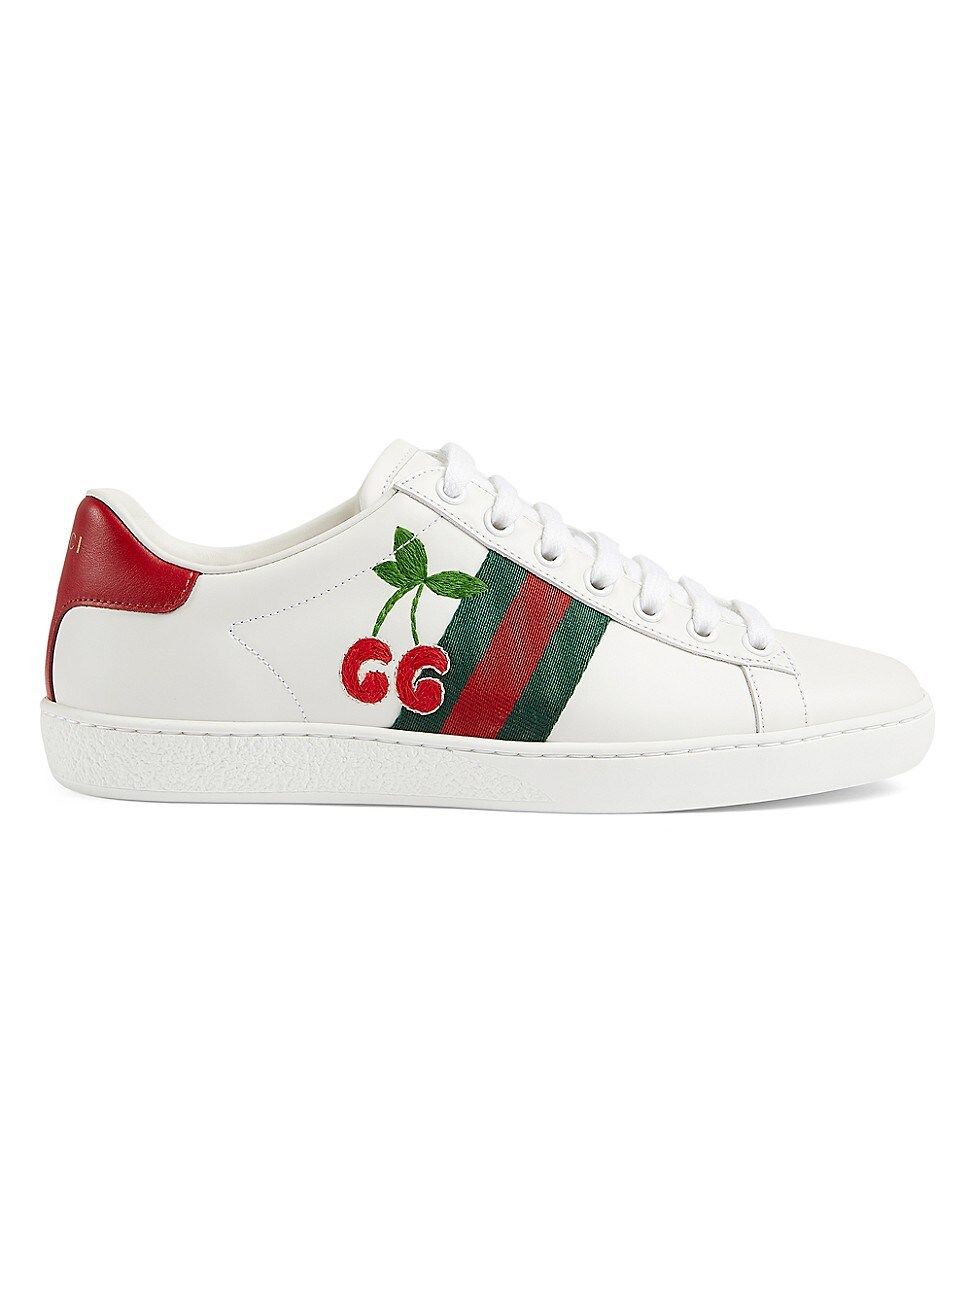 New Ace Cherry Sneakers | Saks Fifth Avenue